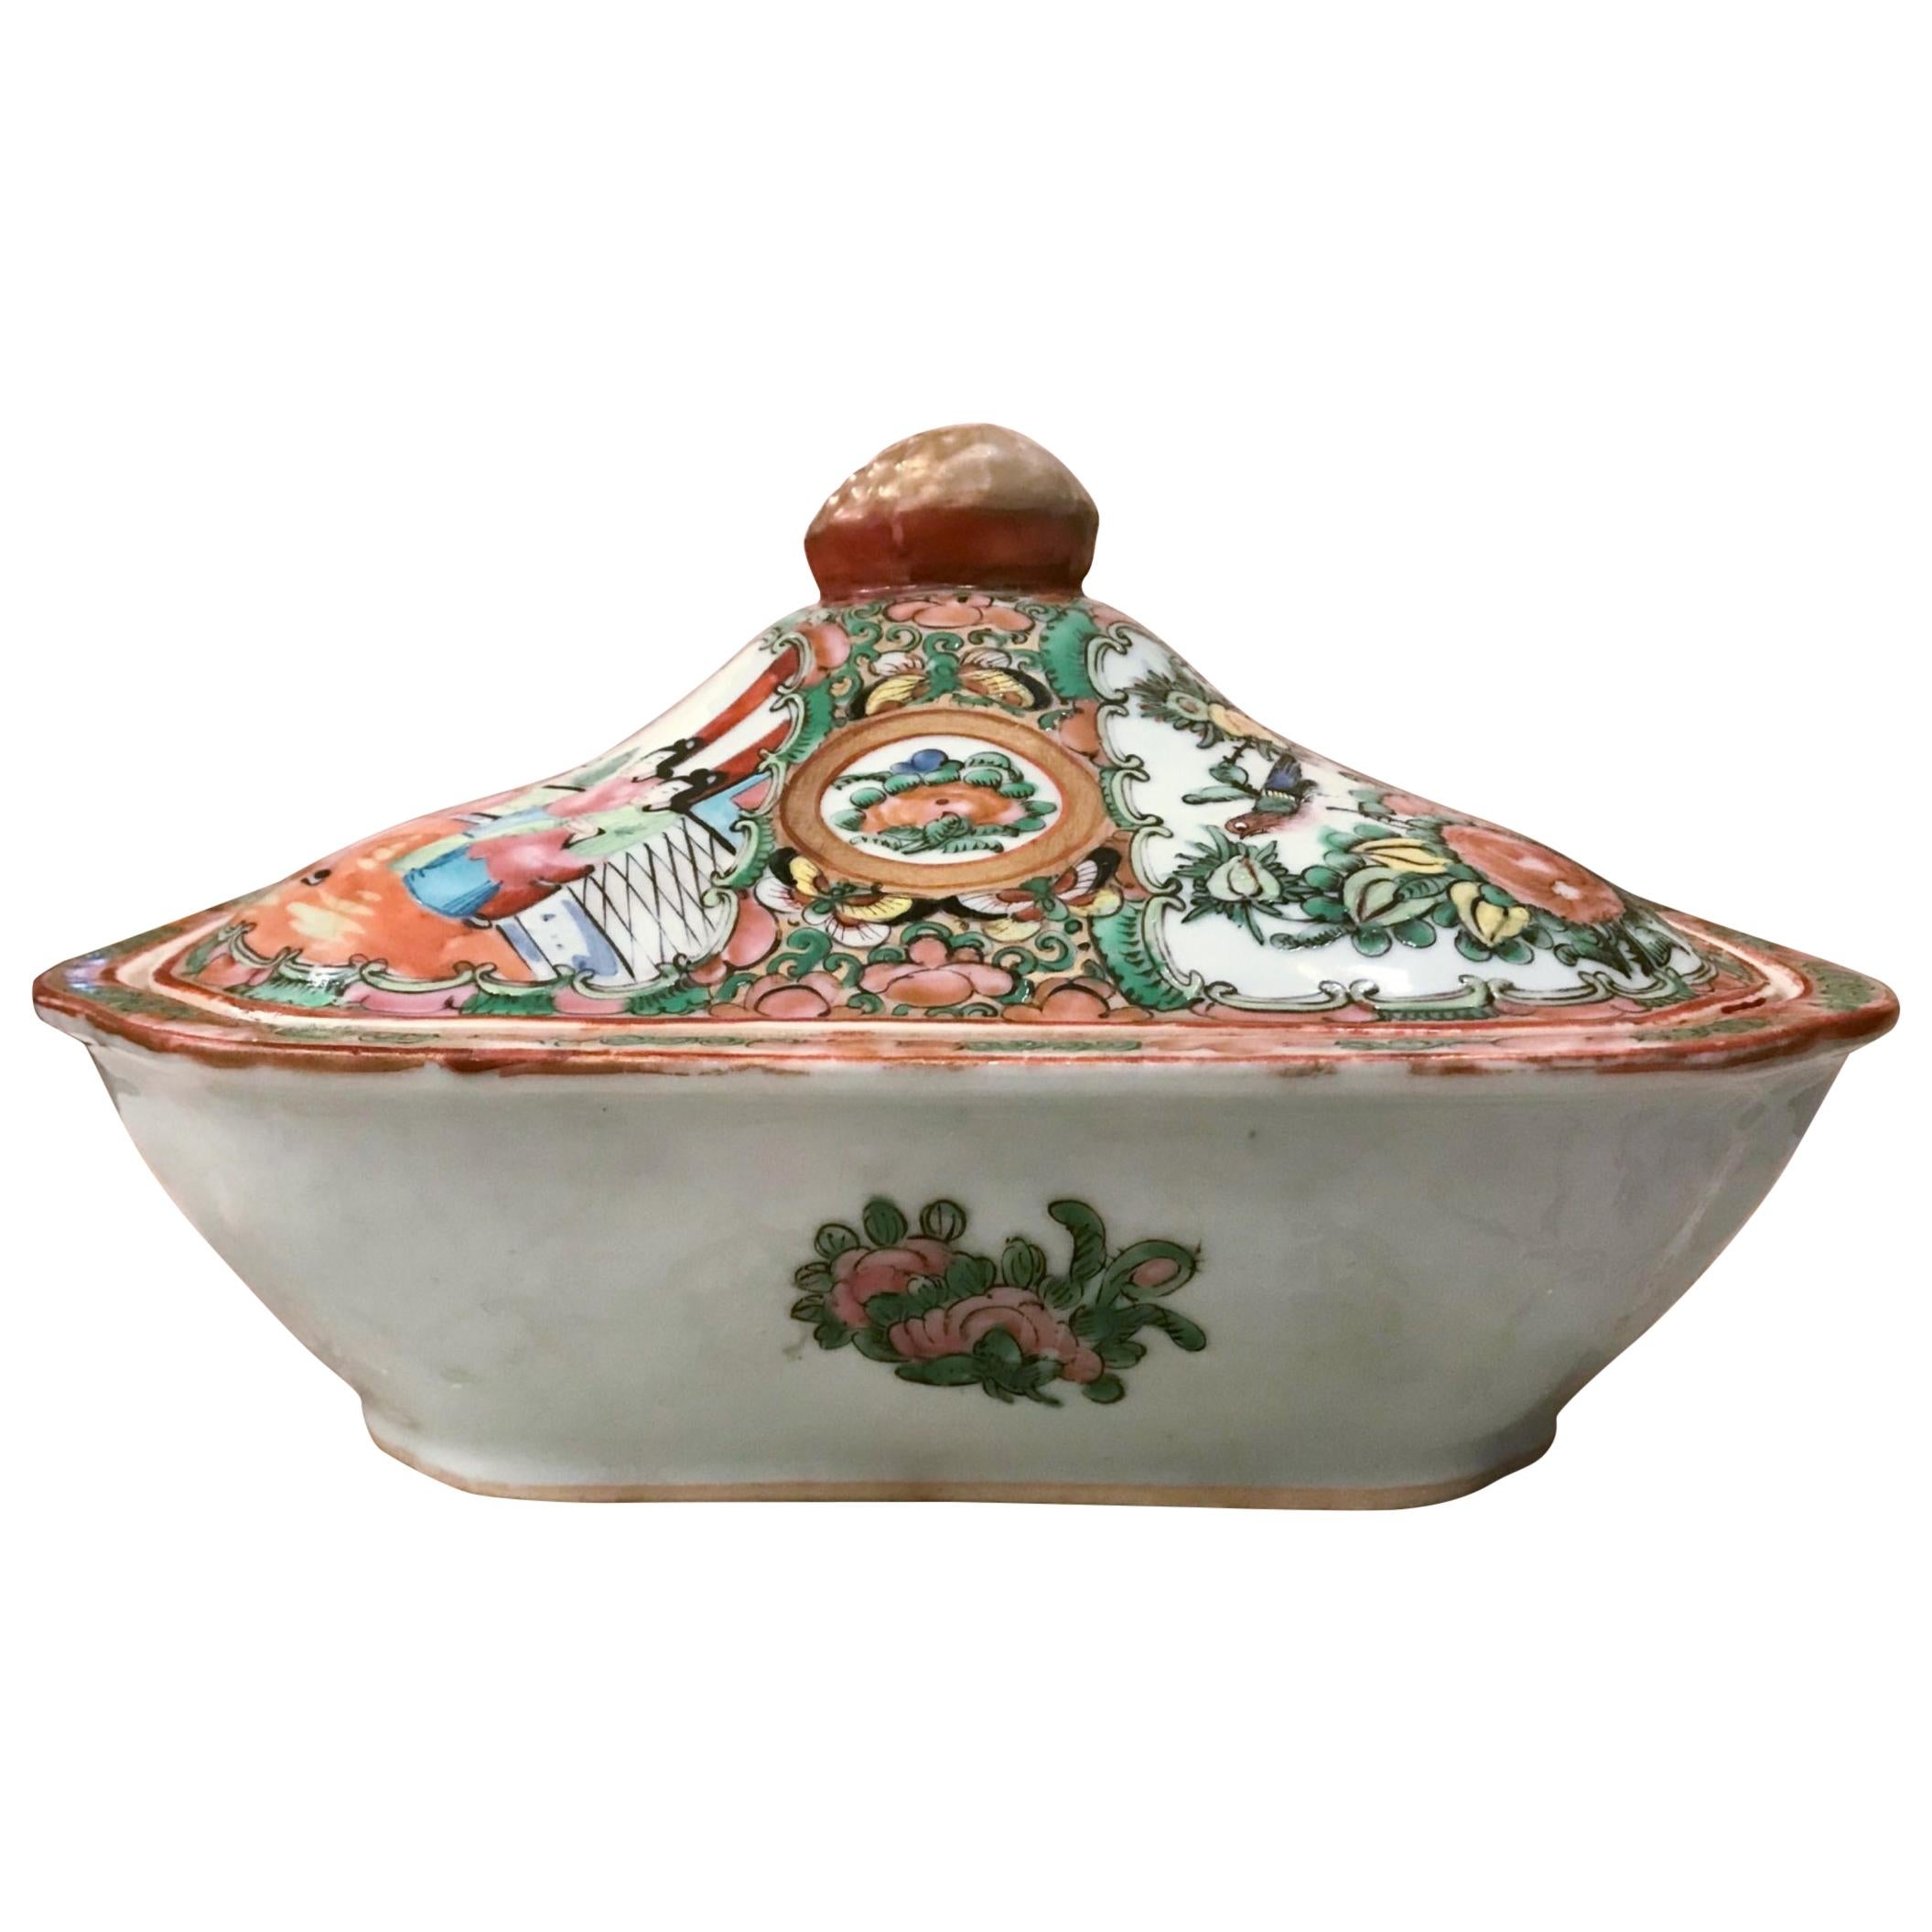 19th Century Rose Medallion Chinese Export Porcelain Covered Dish, Tureen